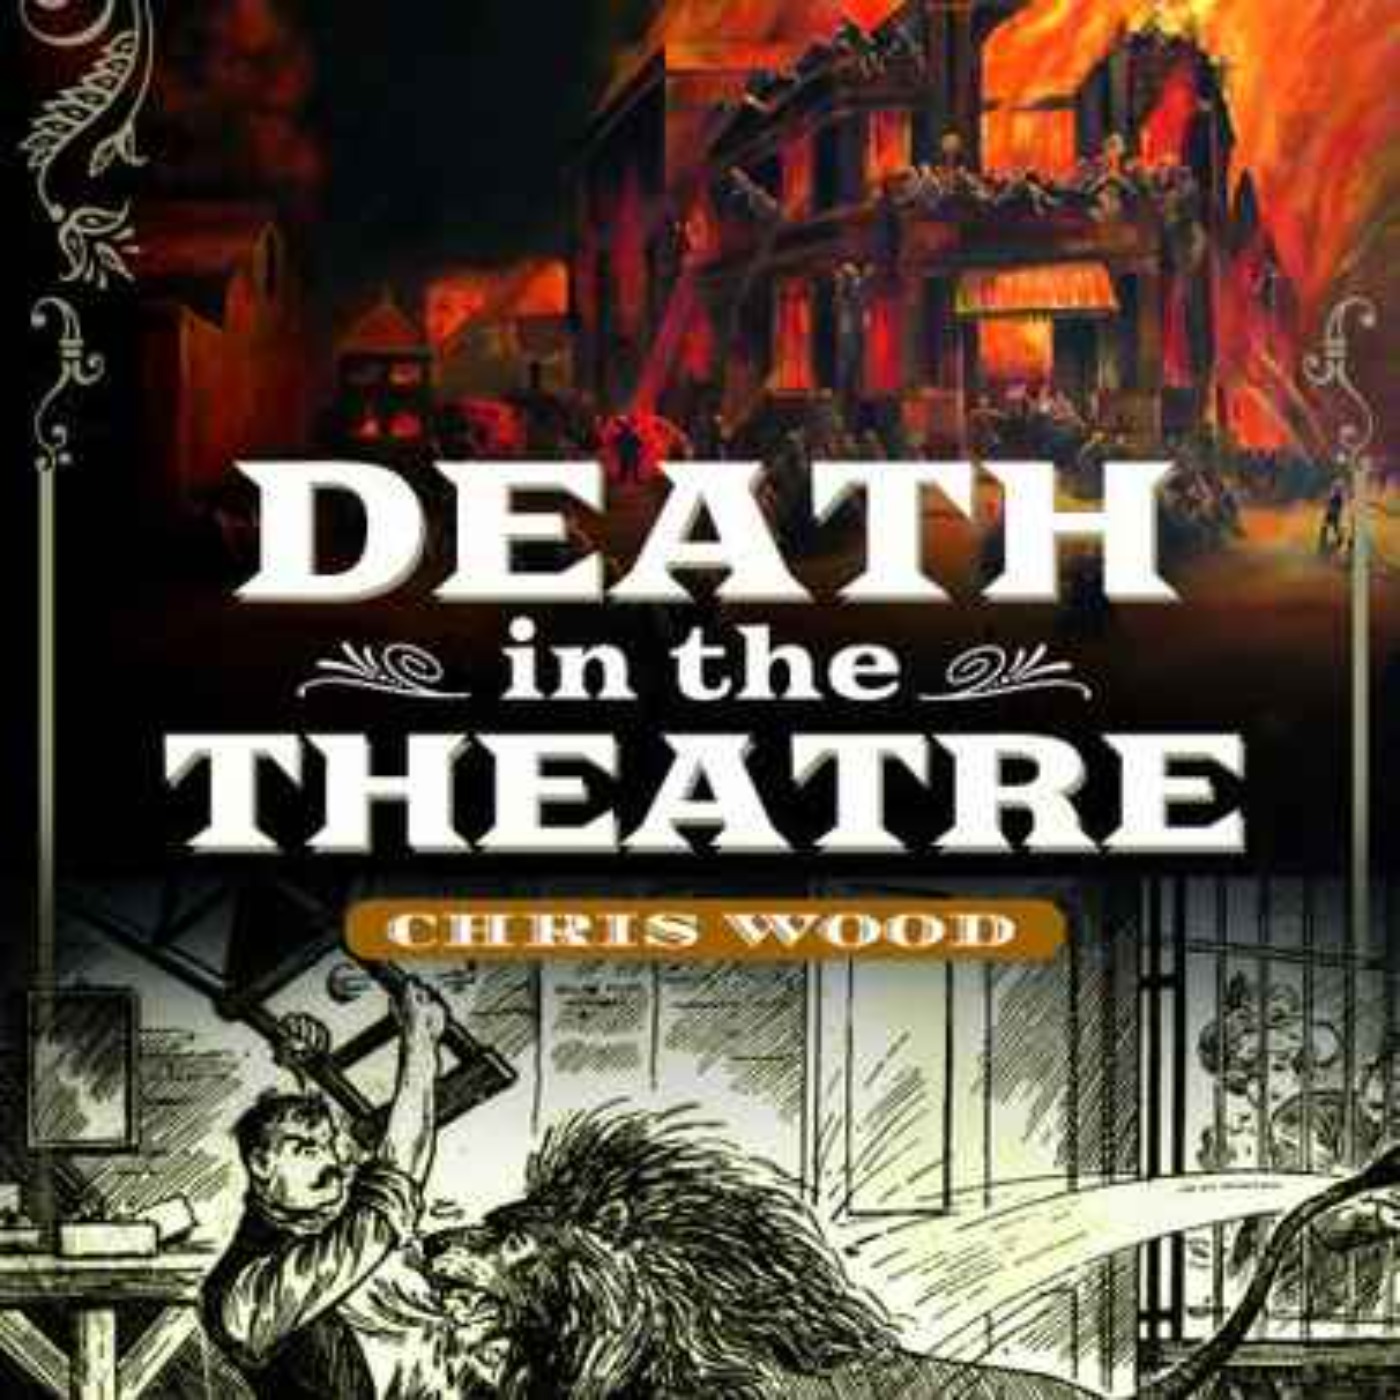 Death in the Theatre with Chris Wood